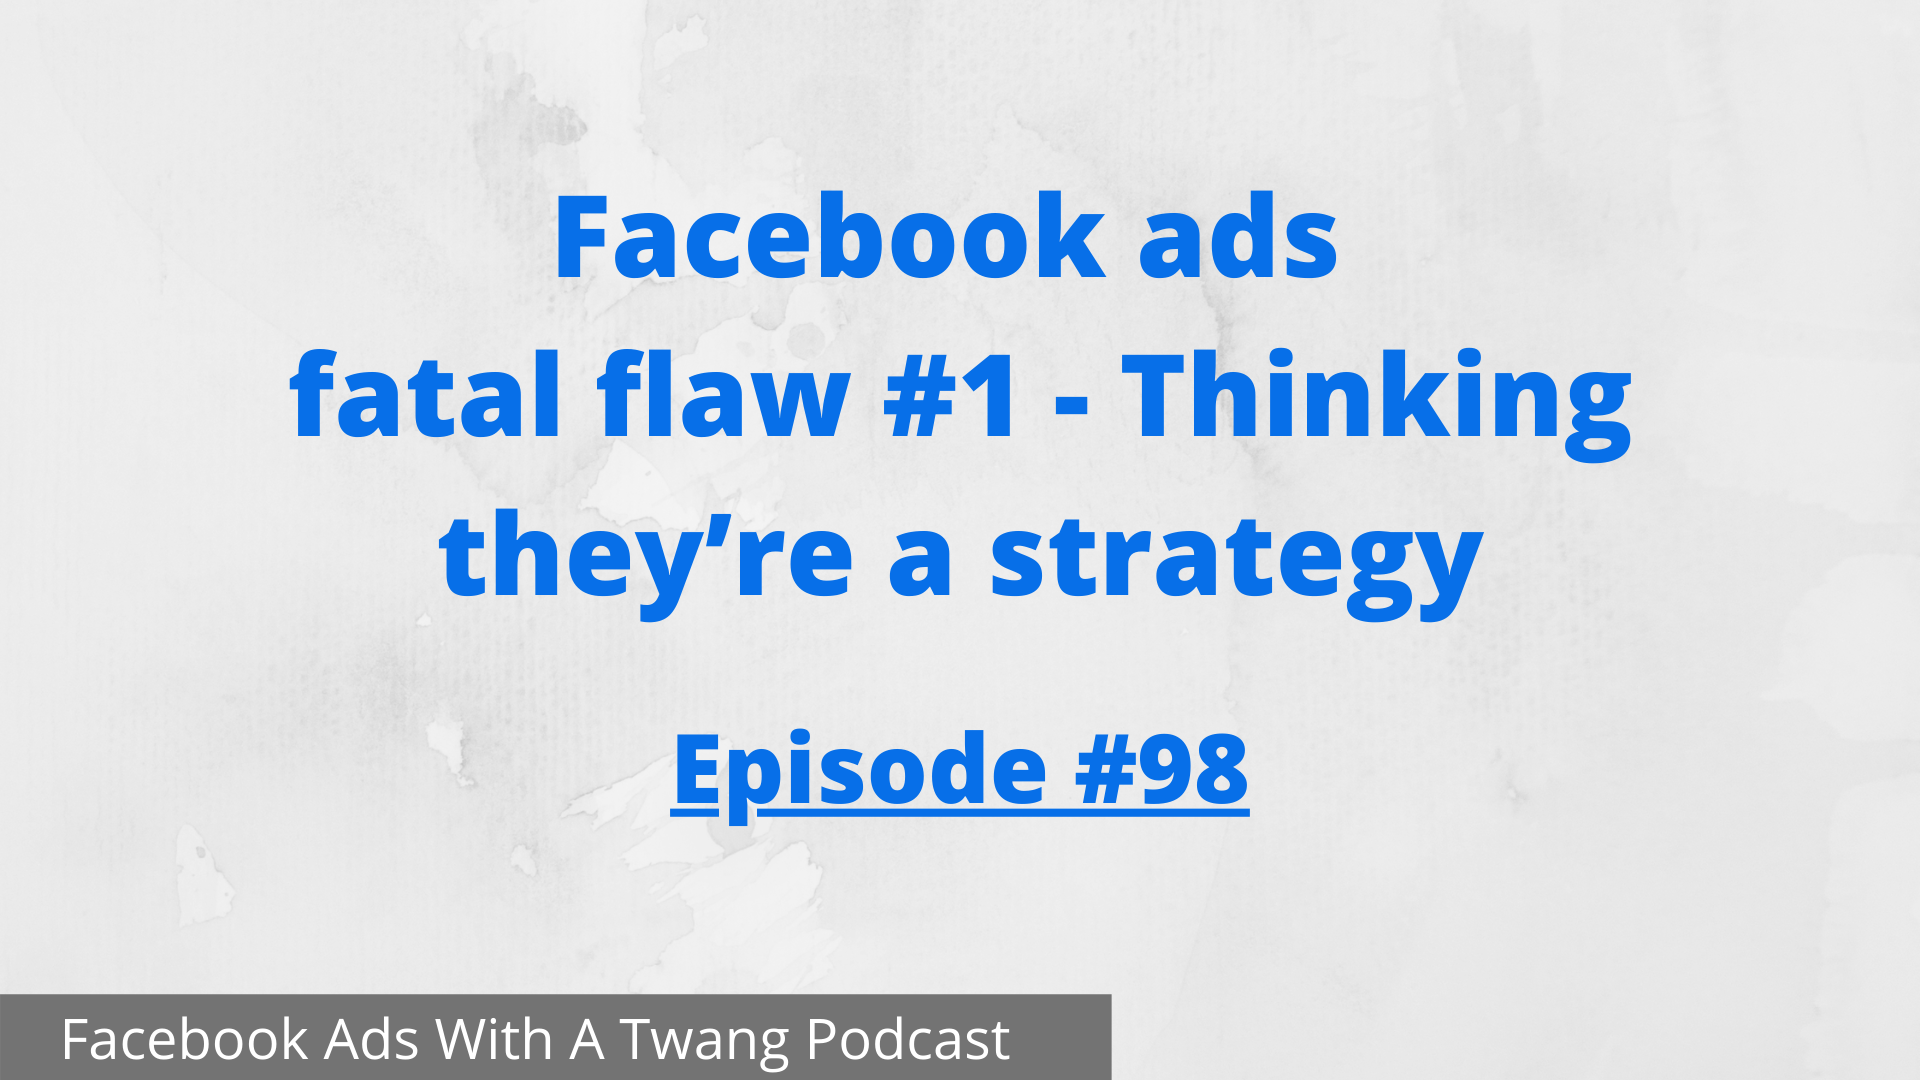 Facebook ads fatal flaw #1 - Thinking they’re a strategy